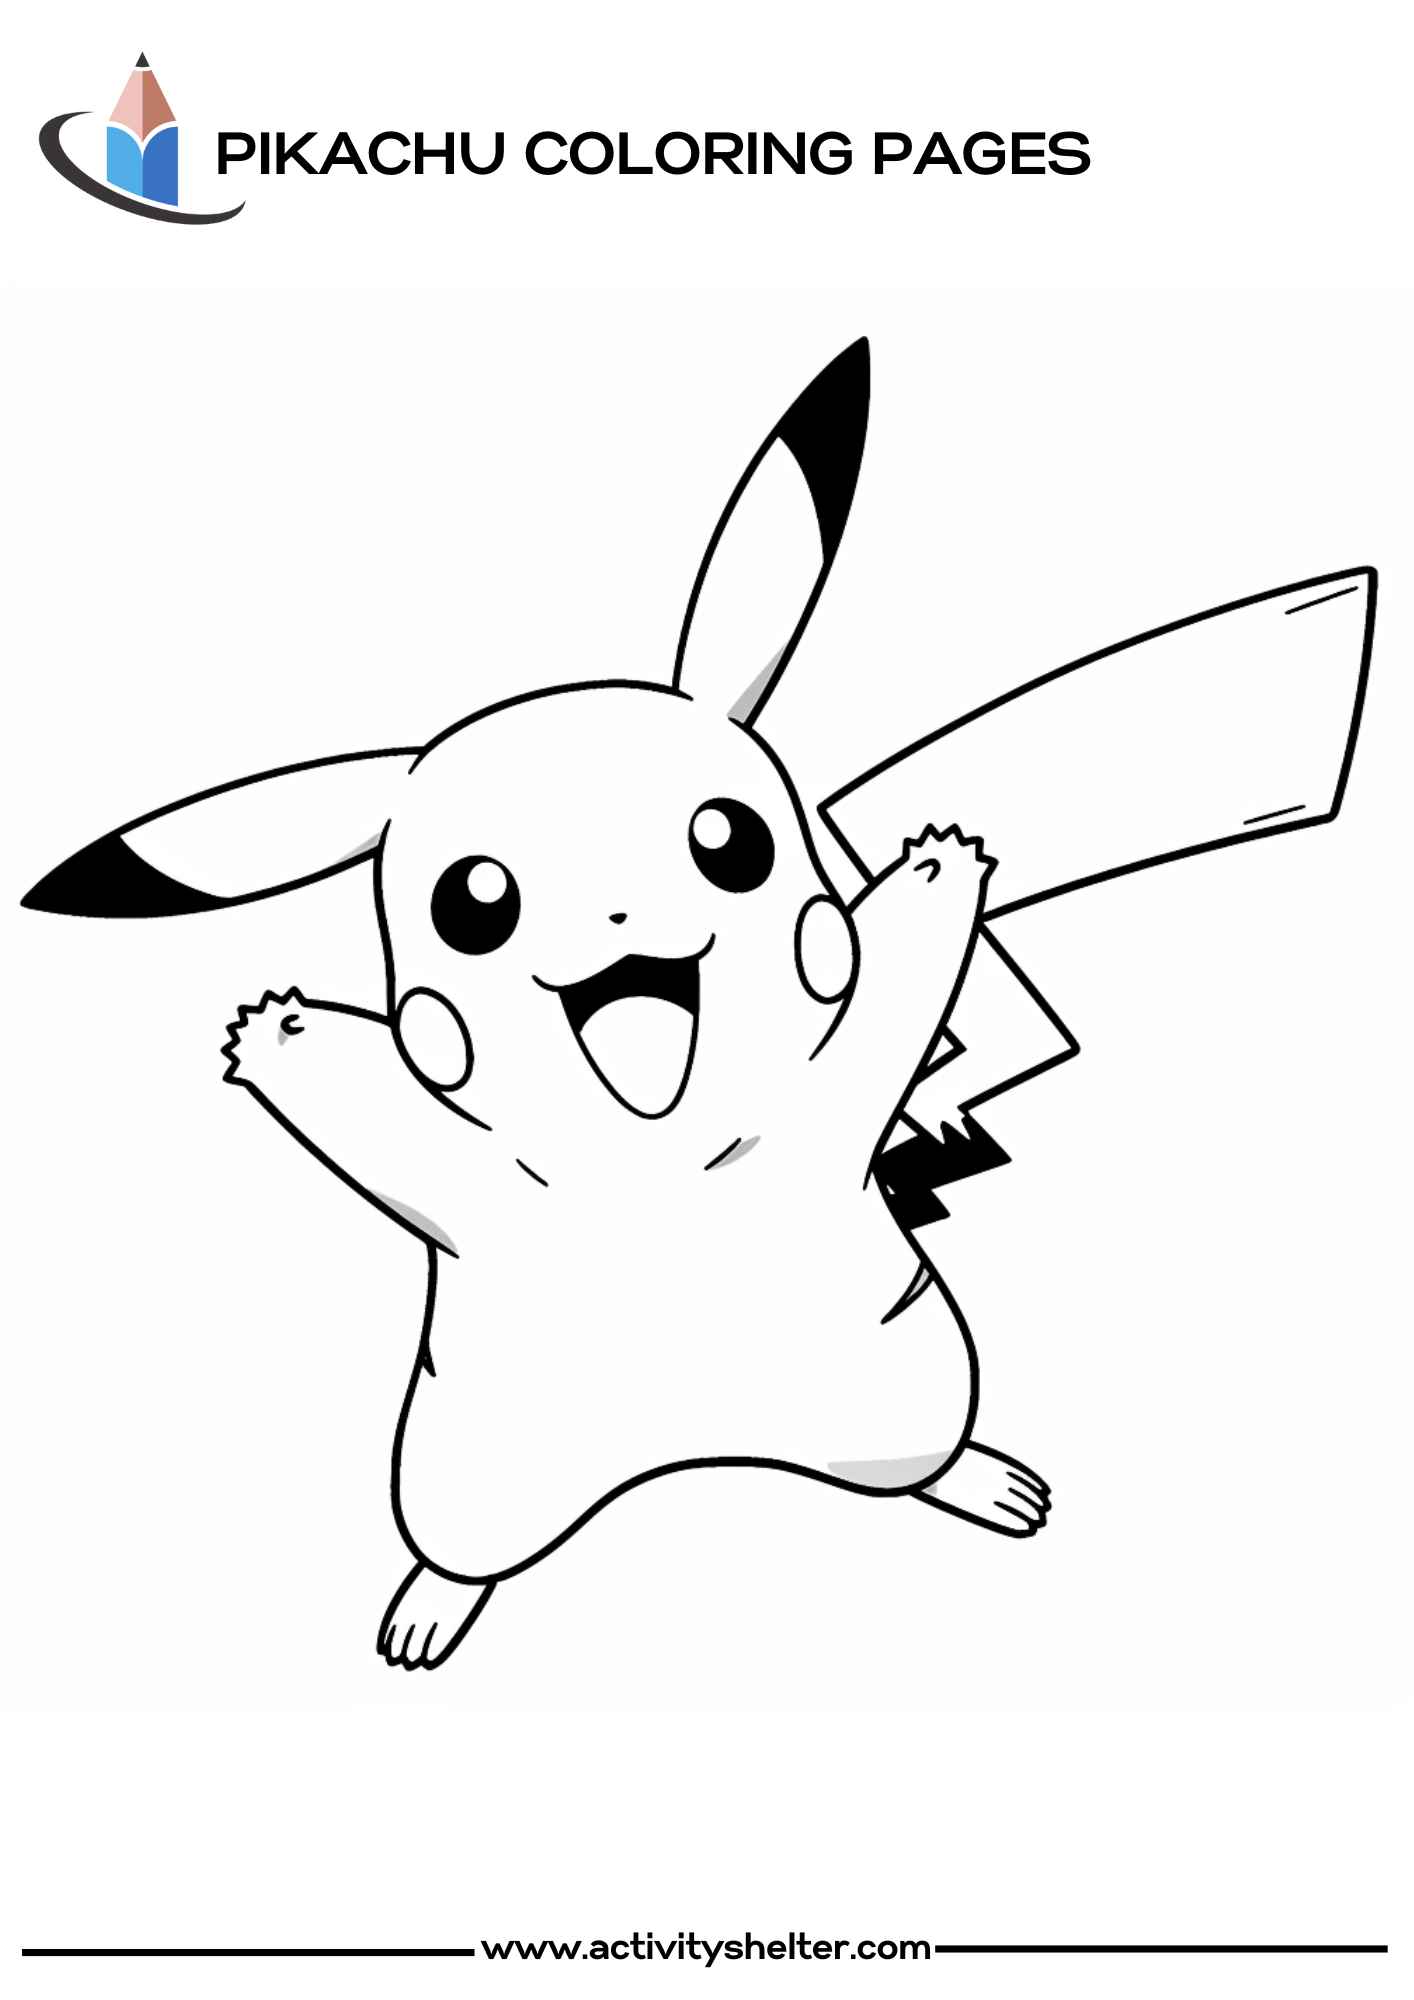 Pikachu Waving Hand Coloring Pages